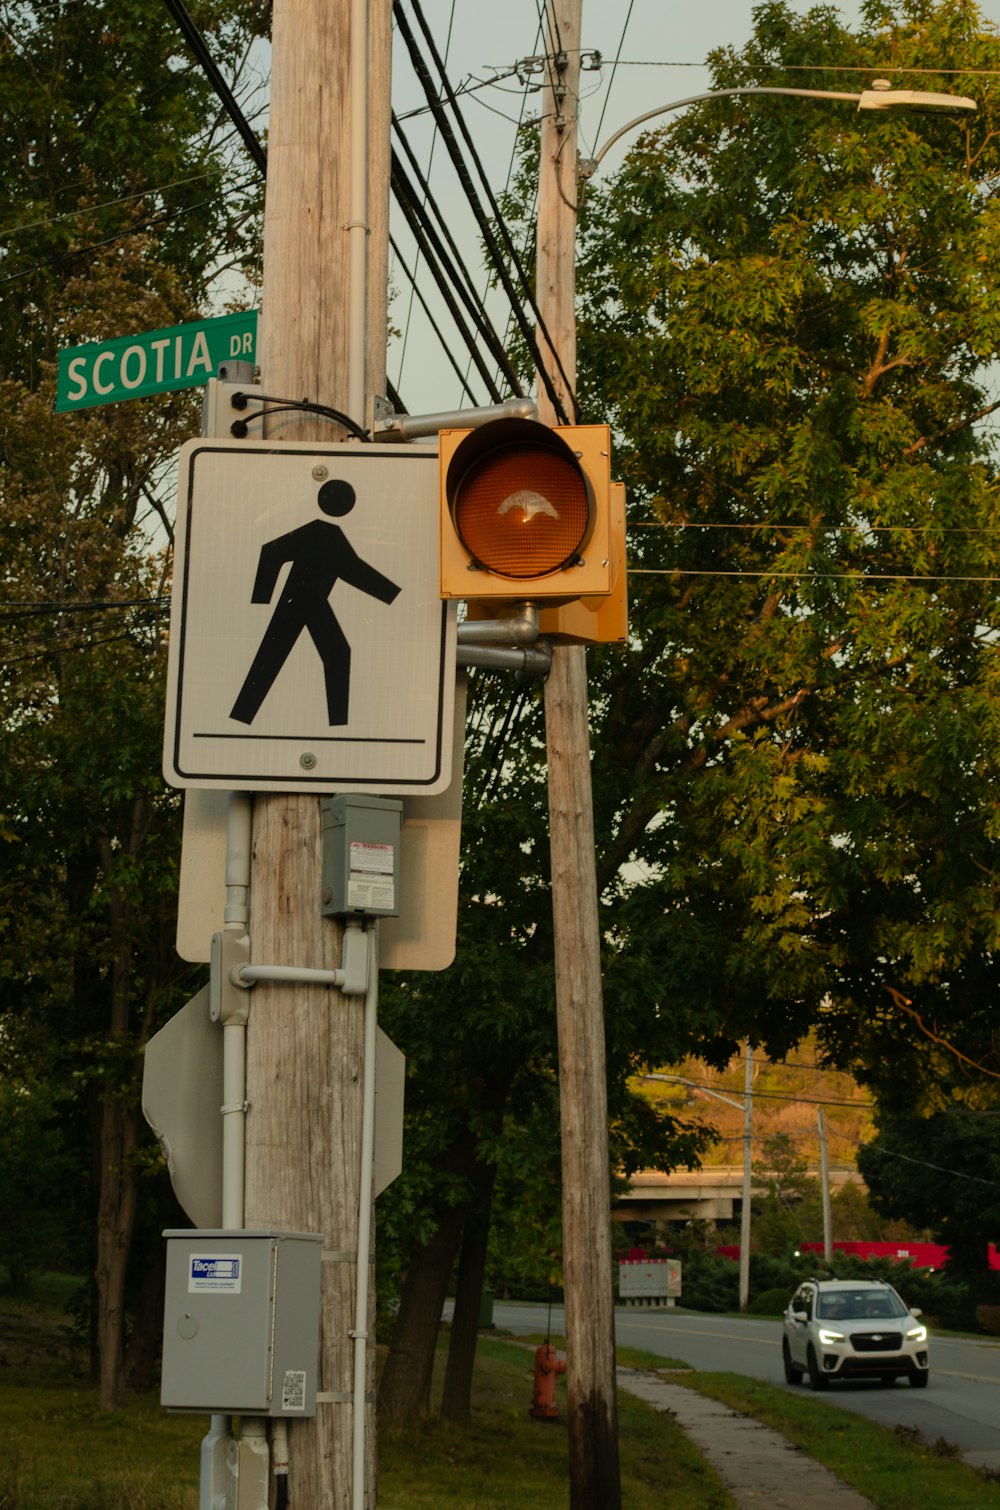 a traffic light is posted on a pole